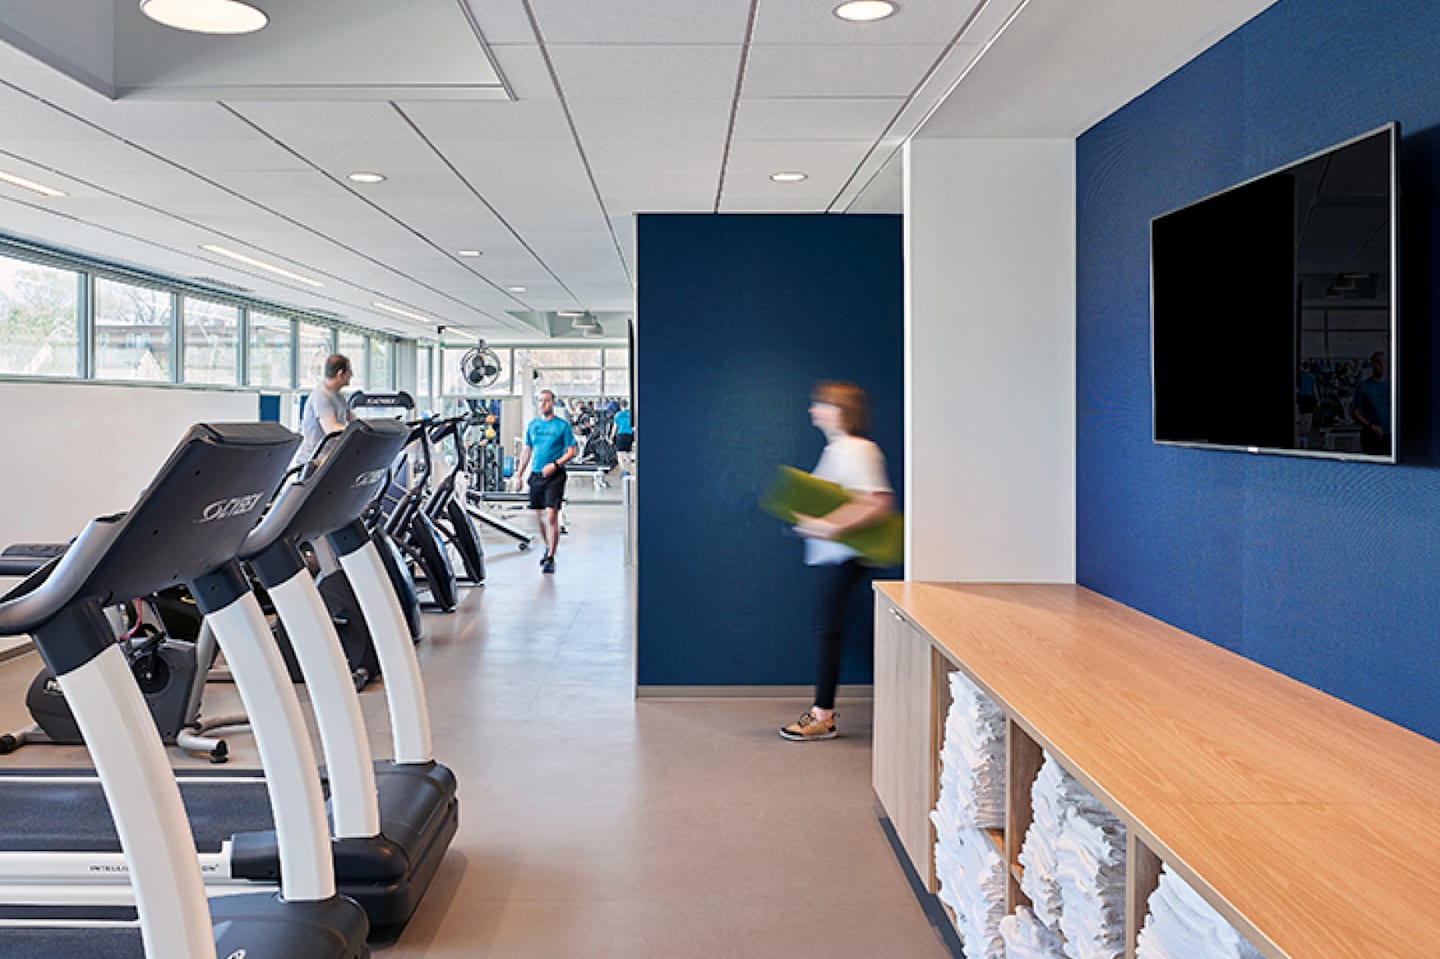 Exercise facilities at American Century.